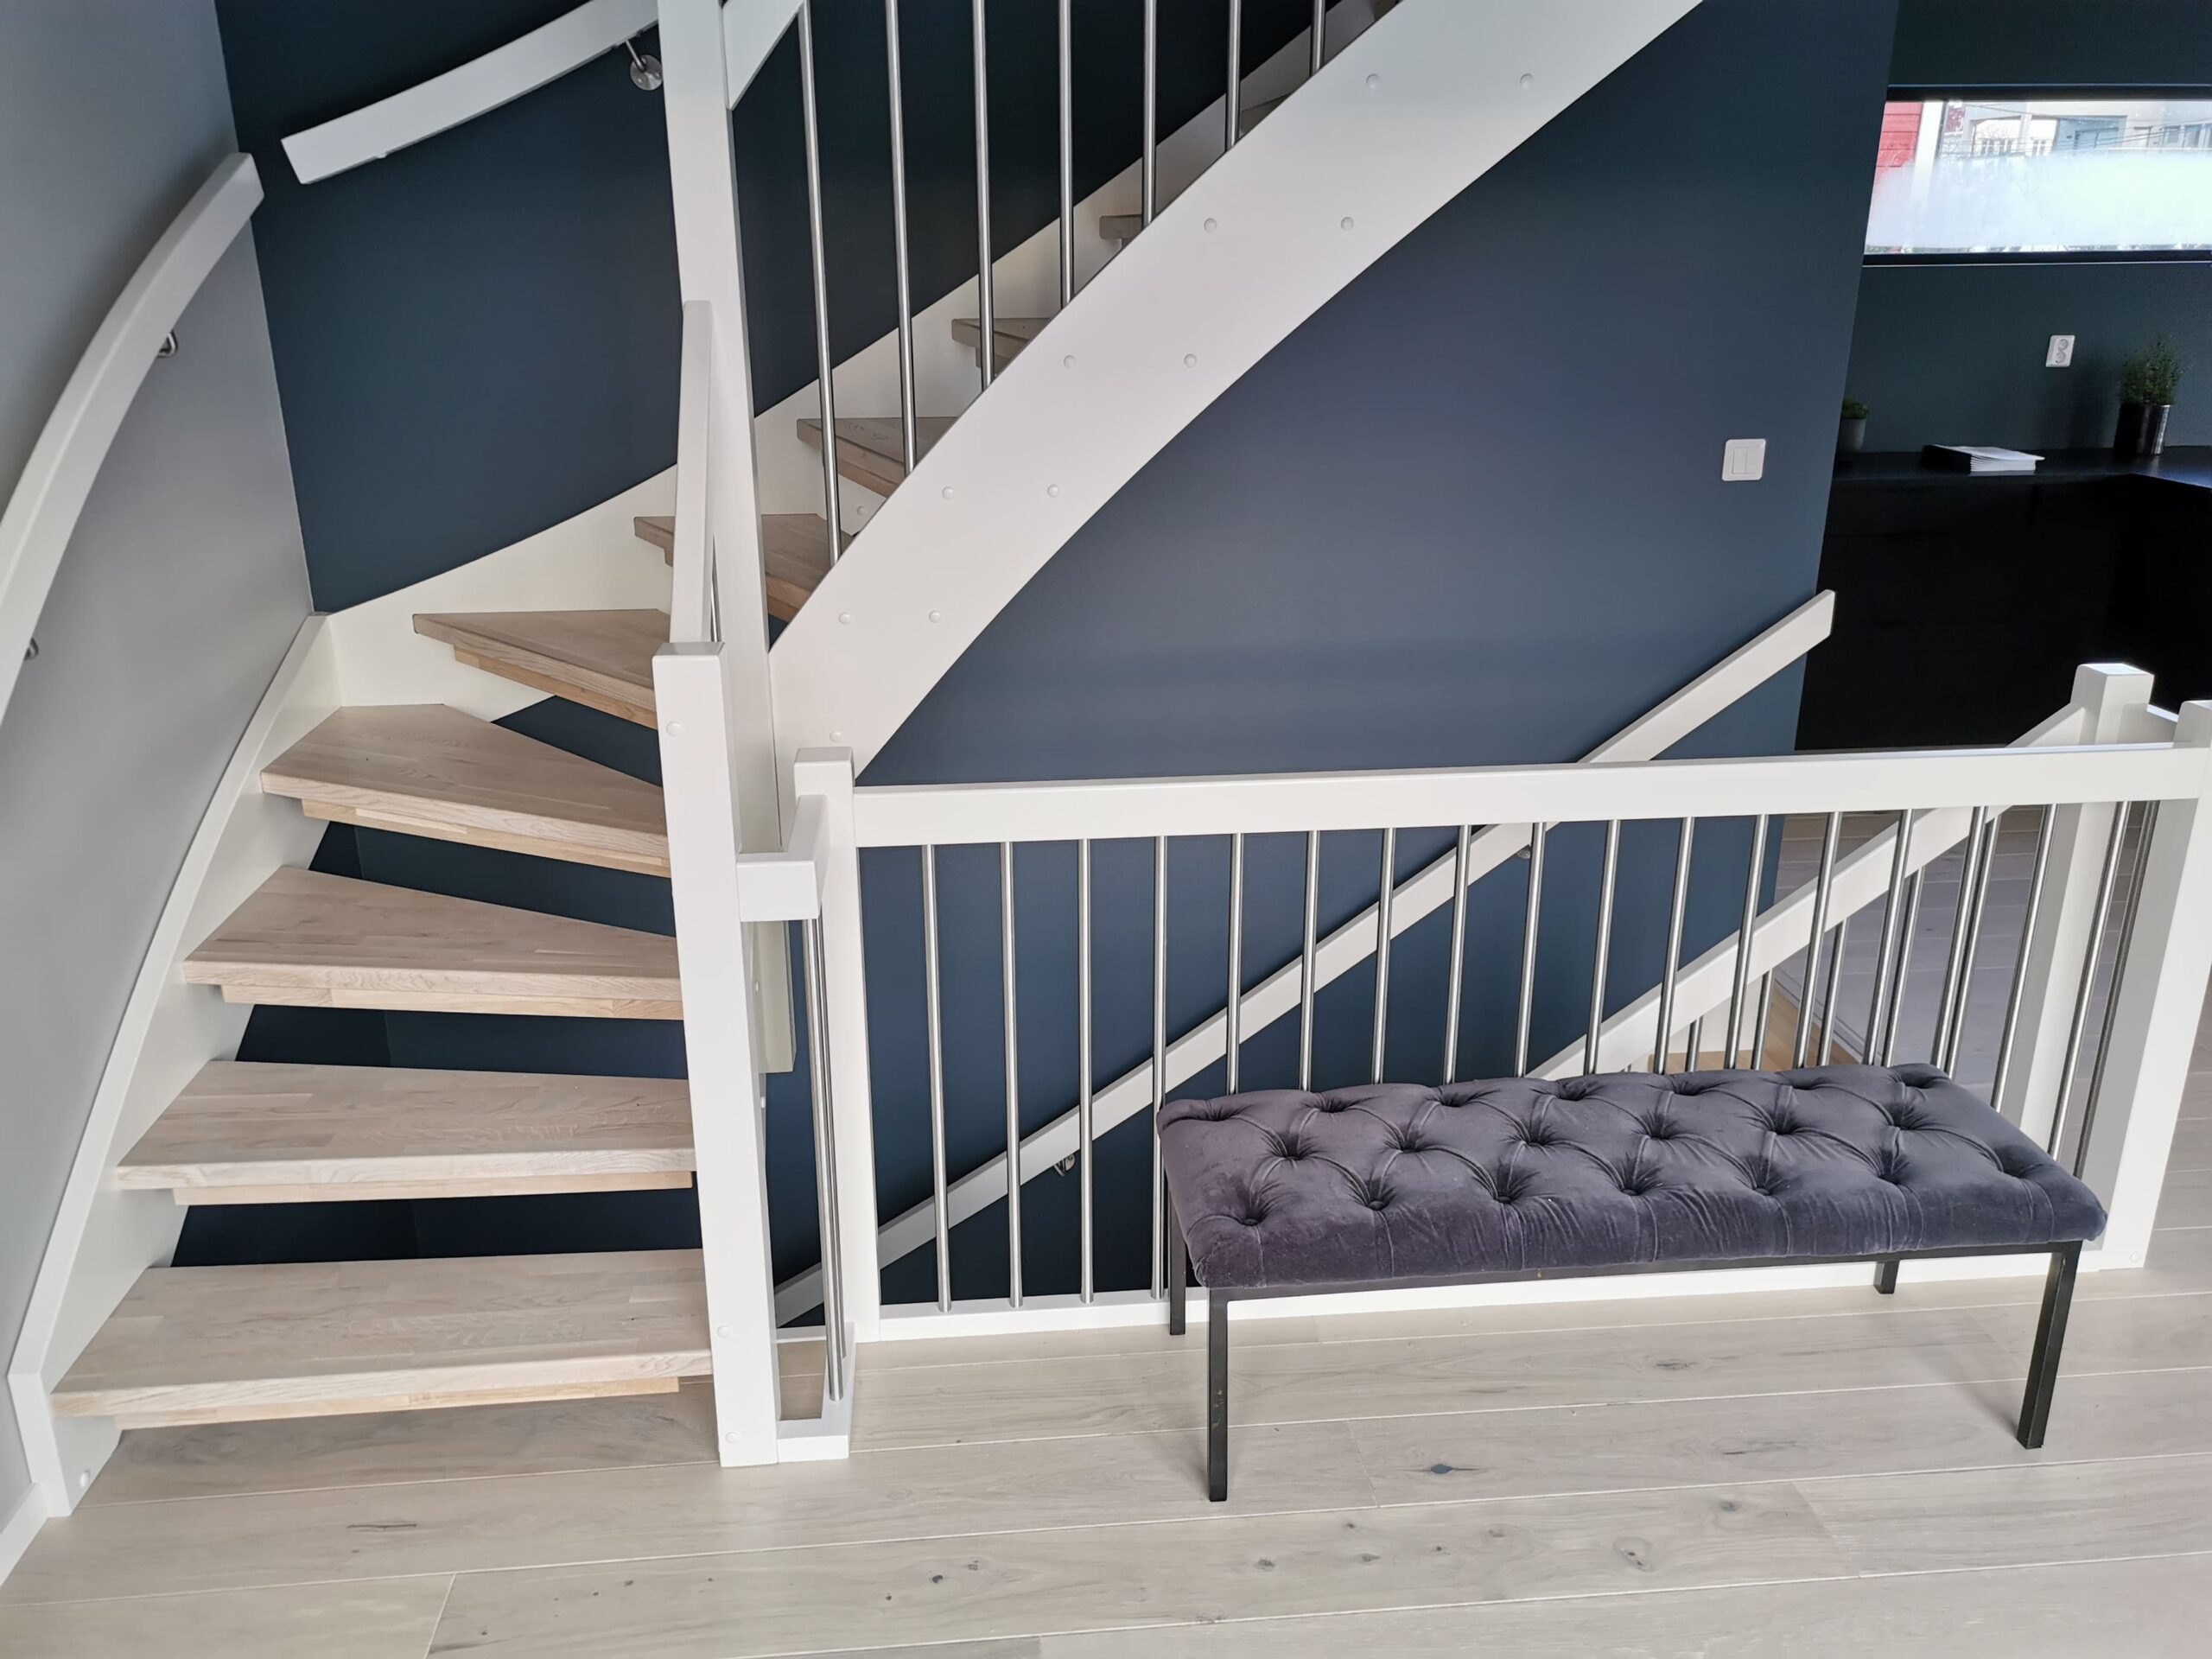 12. Scandinavian style staircase through two floors